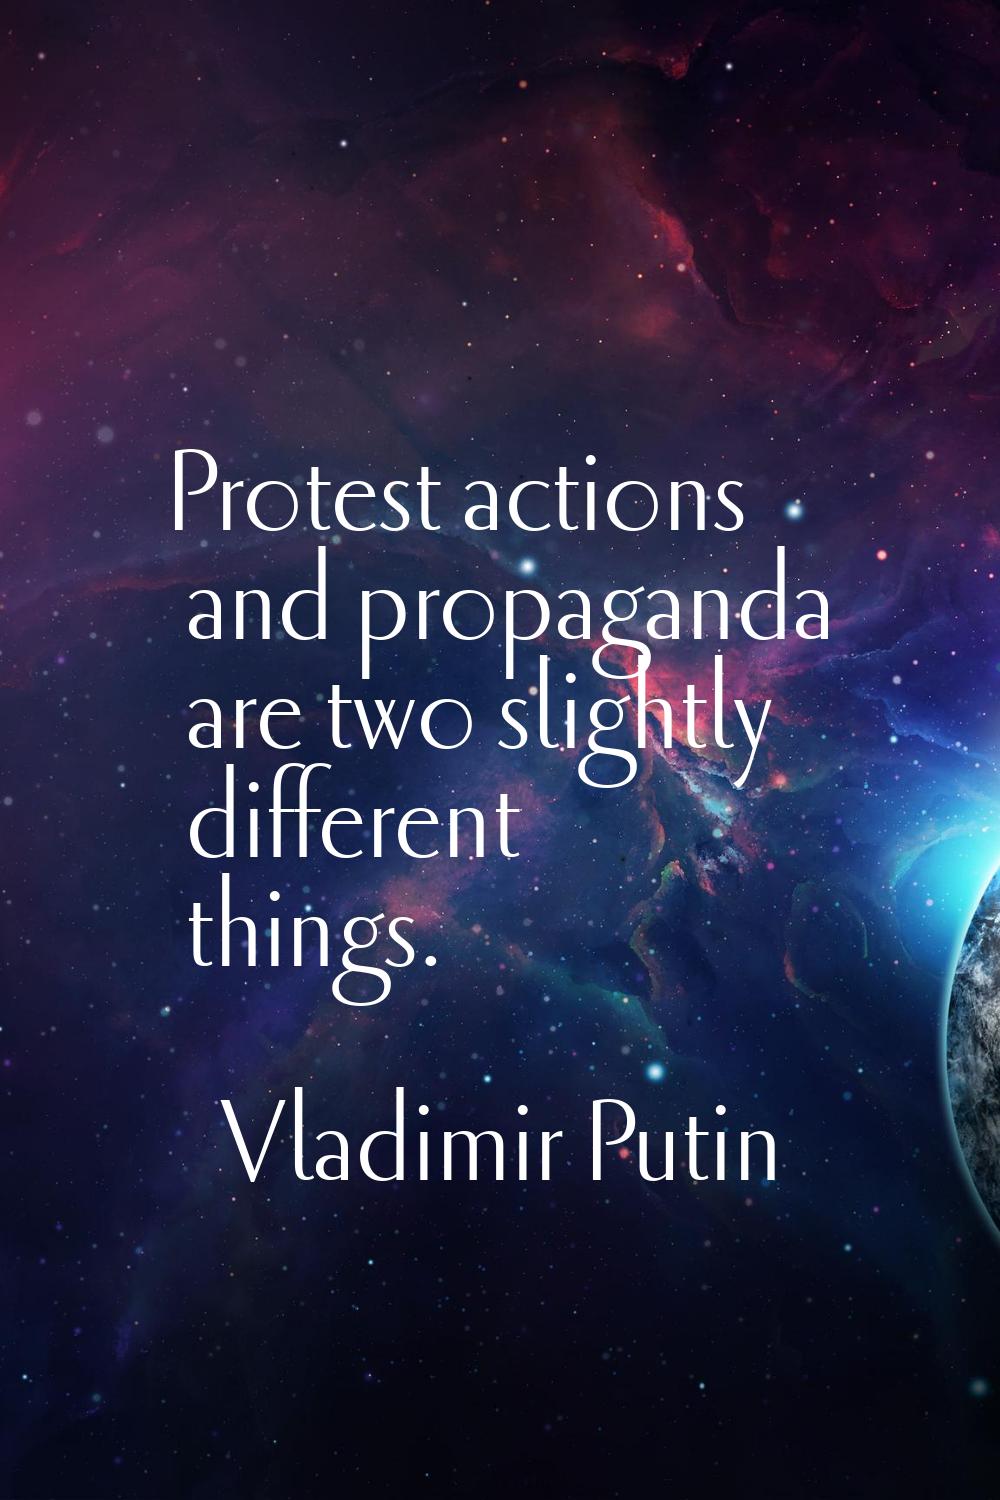 Protest actions and propaganda are two slightly different things.